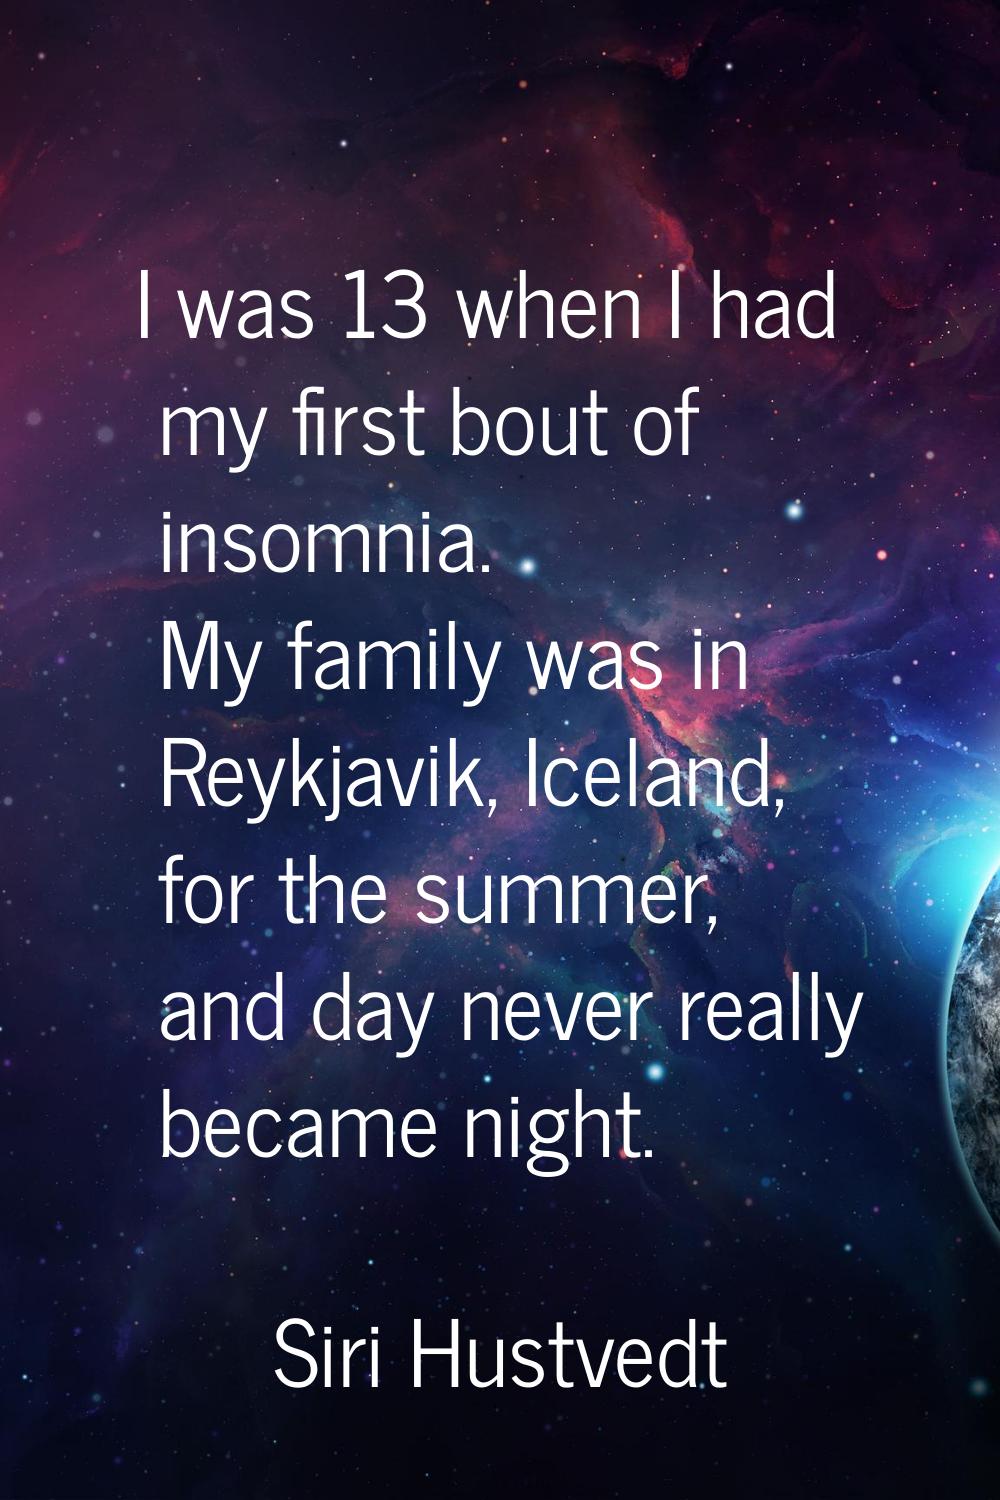 I was 13 when I had my first bout of insomnia. My family was in Reykjavik, Iceland, for the summer,